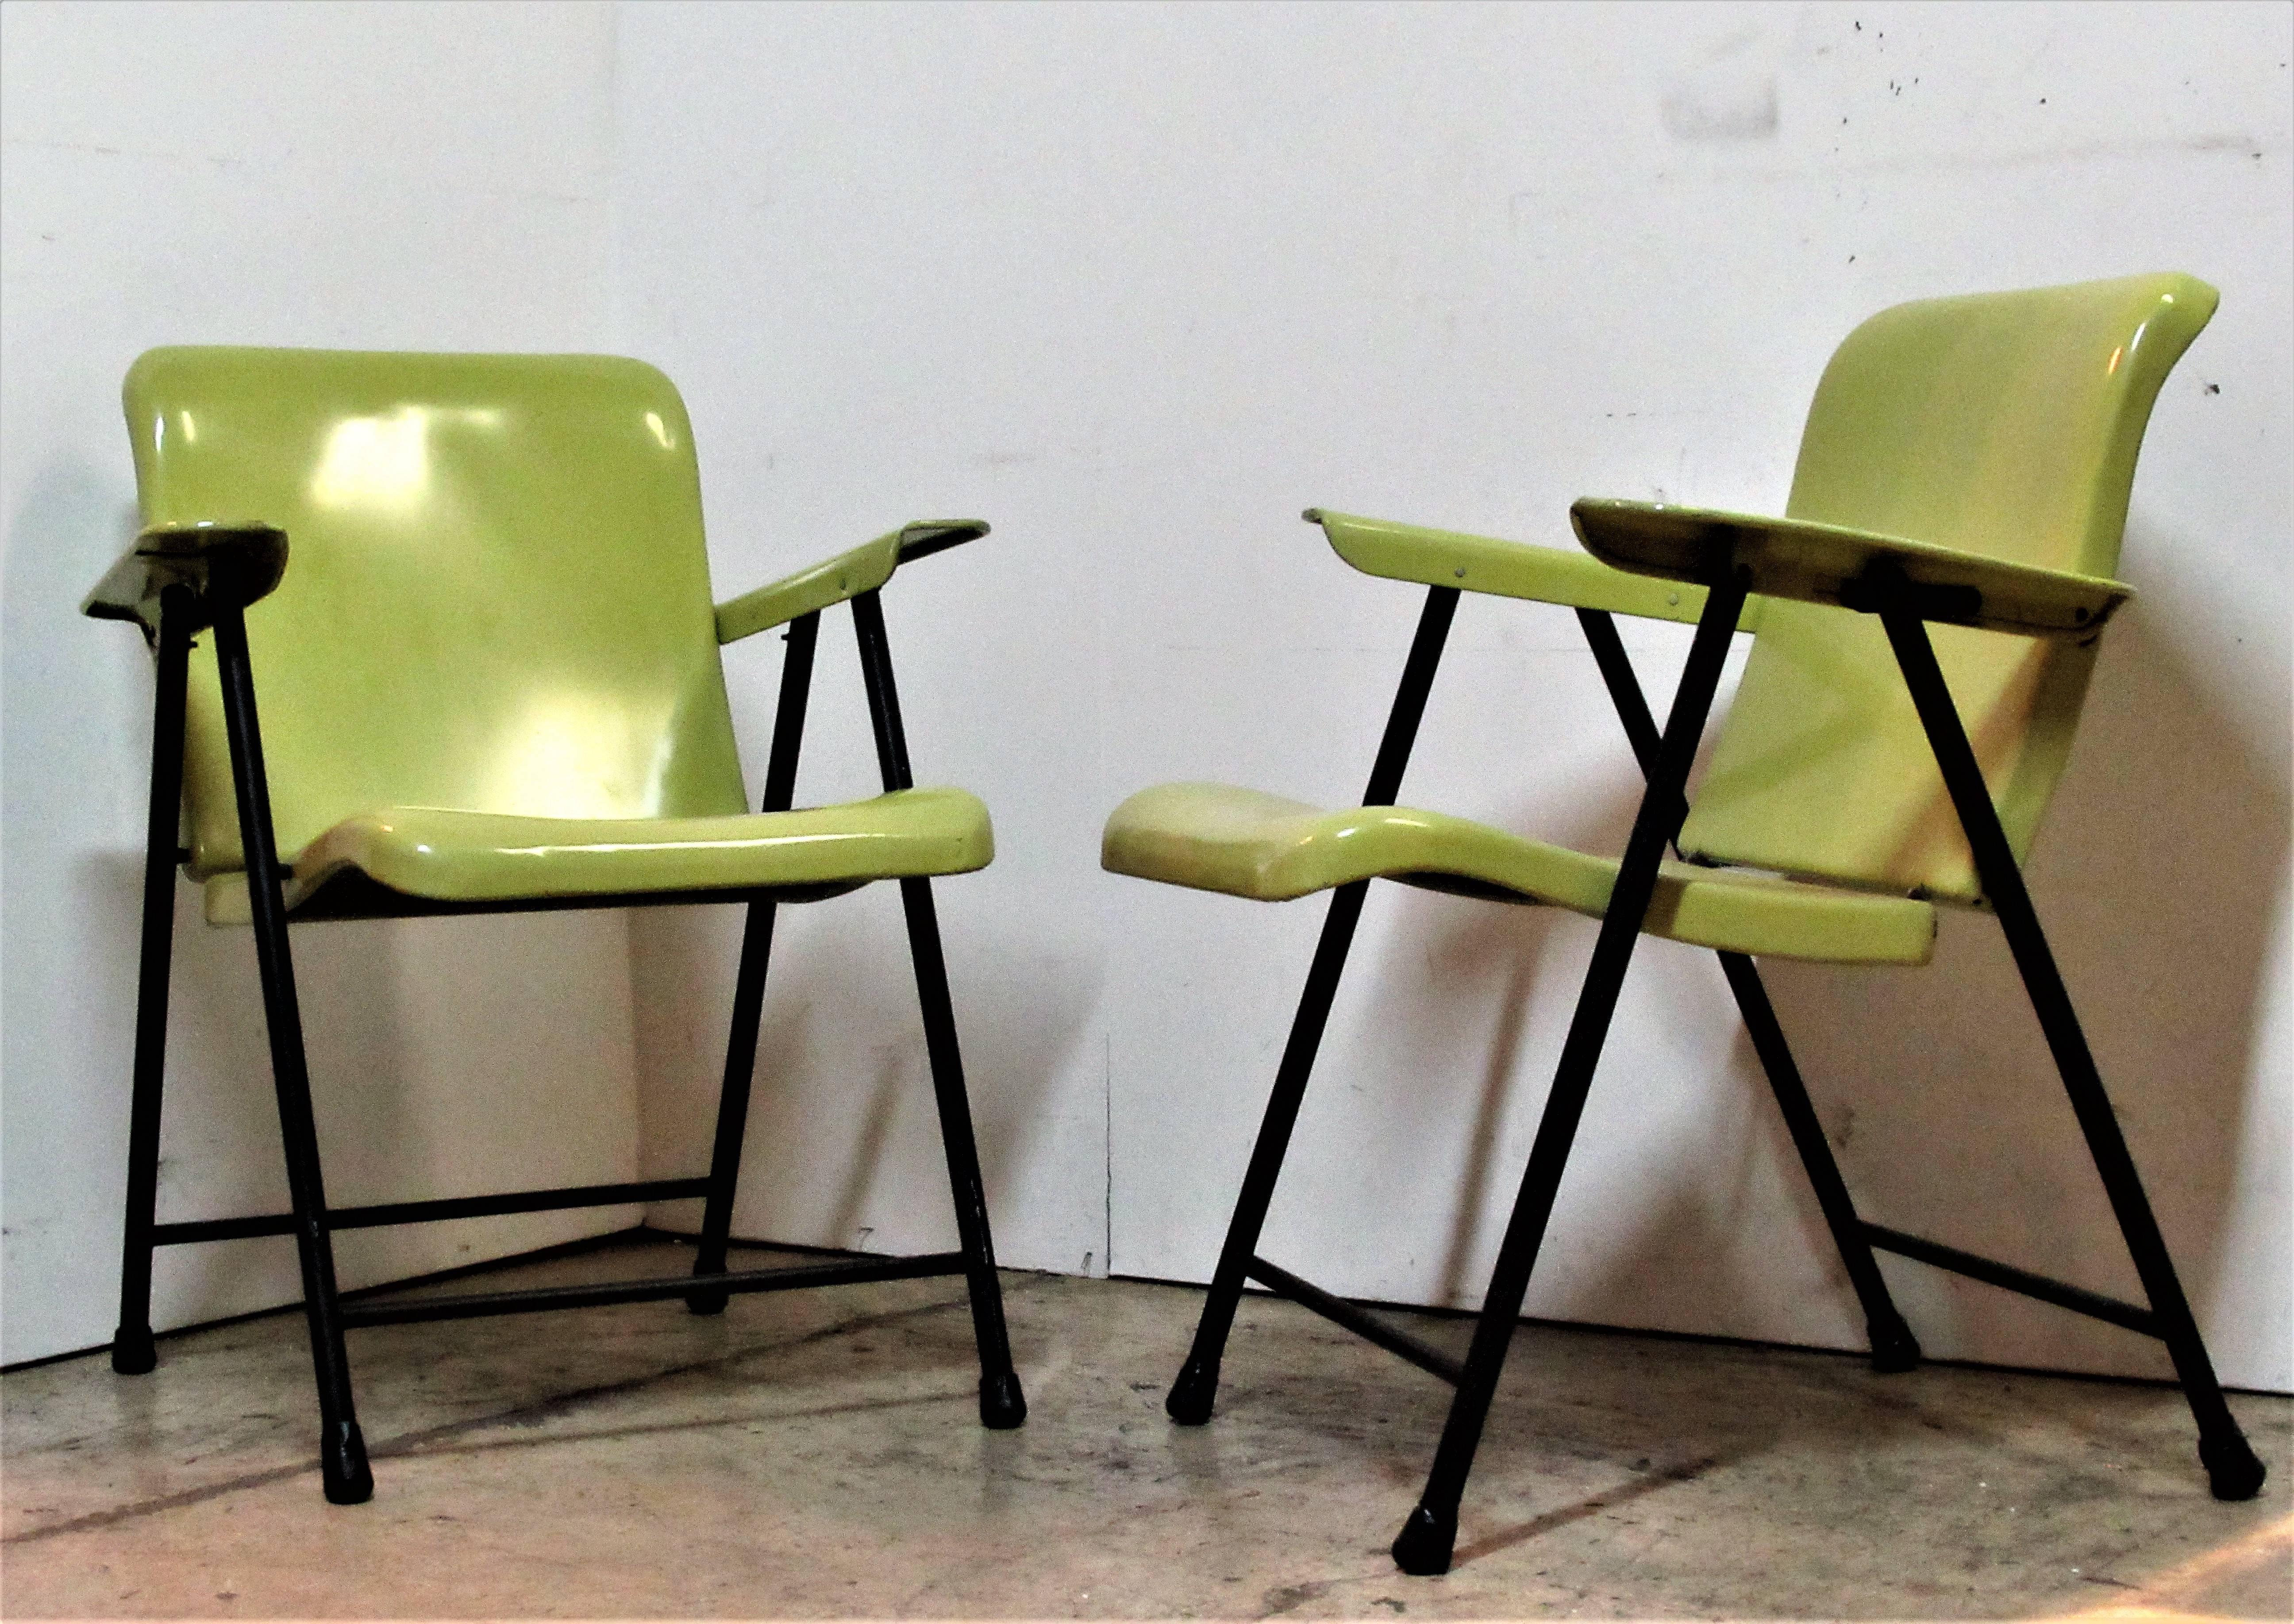 A pair of mid-20th century steel folding armchairs by Russel Wright for Samsonite in 100% all original glowing chartreuse and black factory enamel painted surface. Hard to find in this great condition.